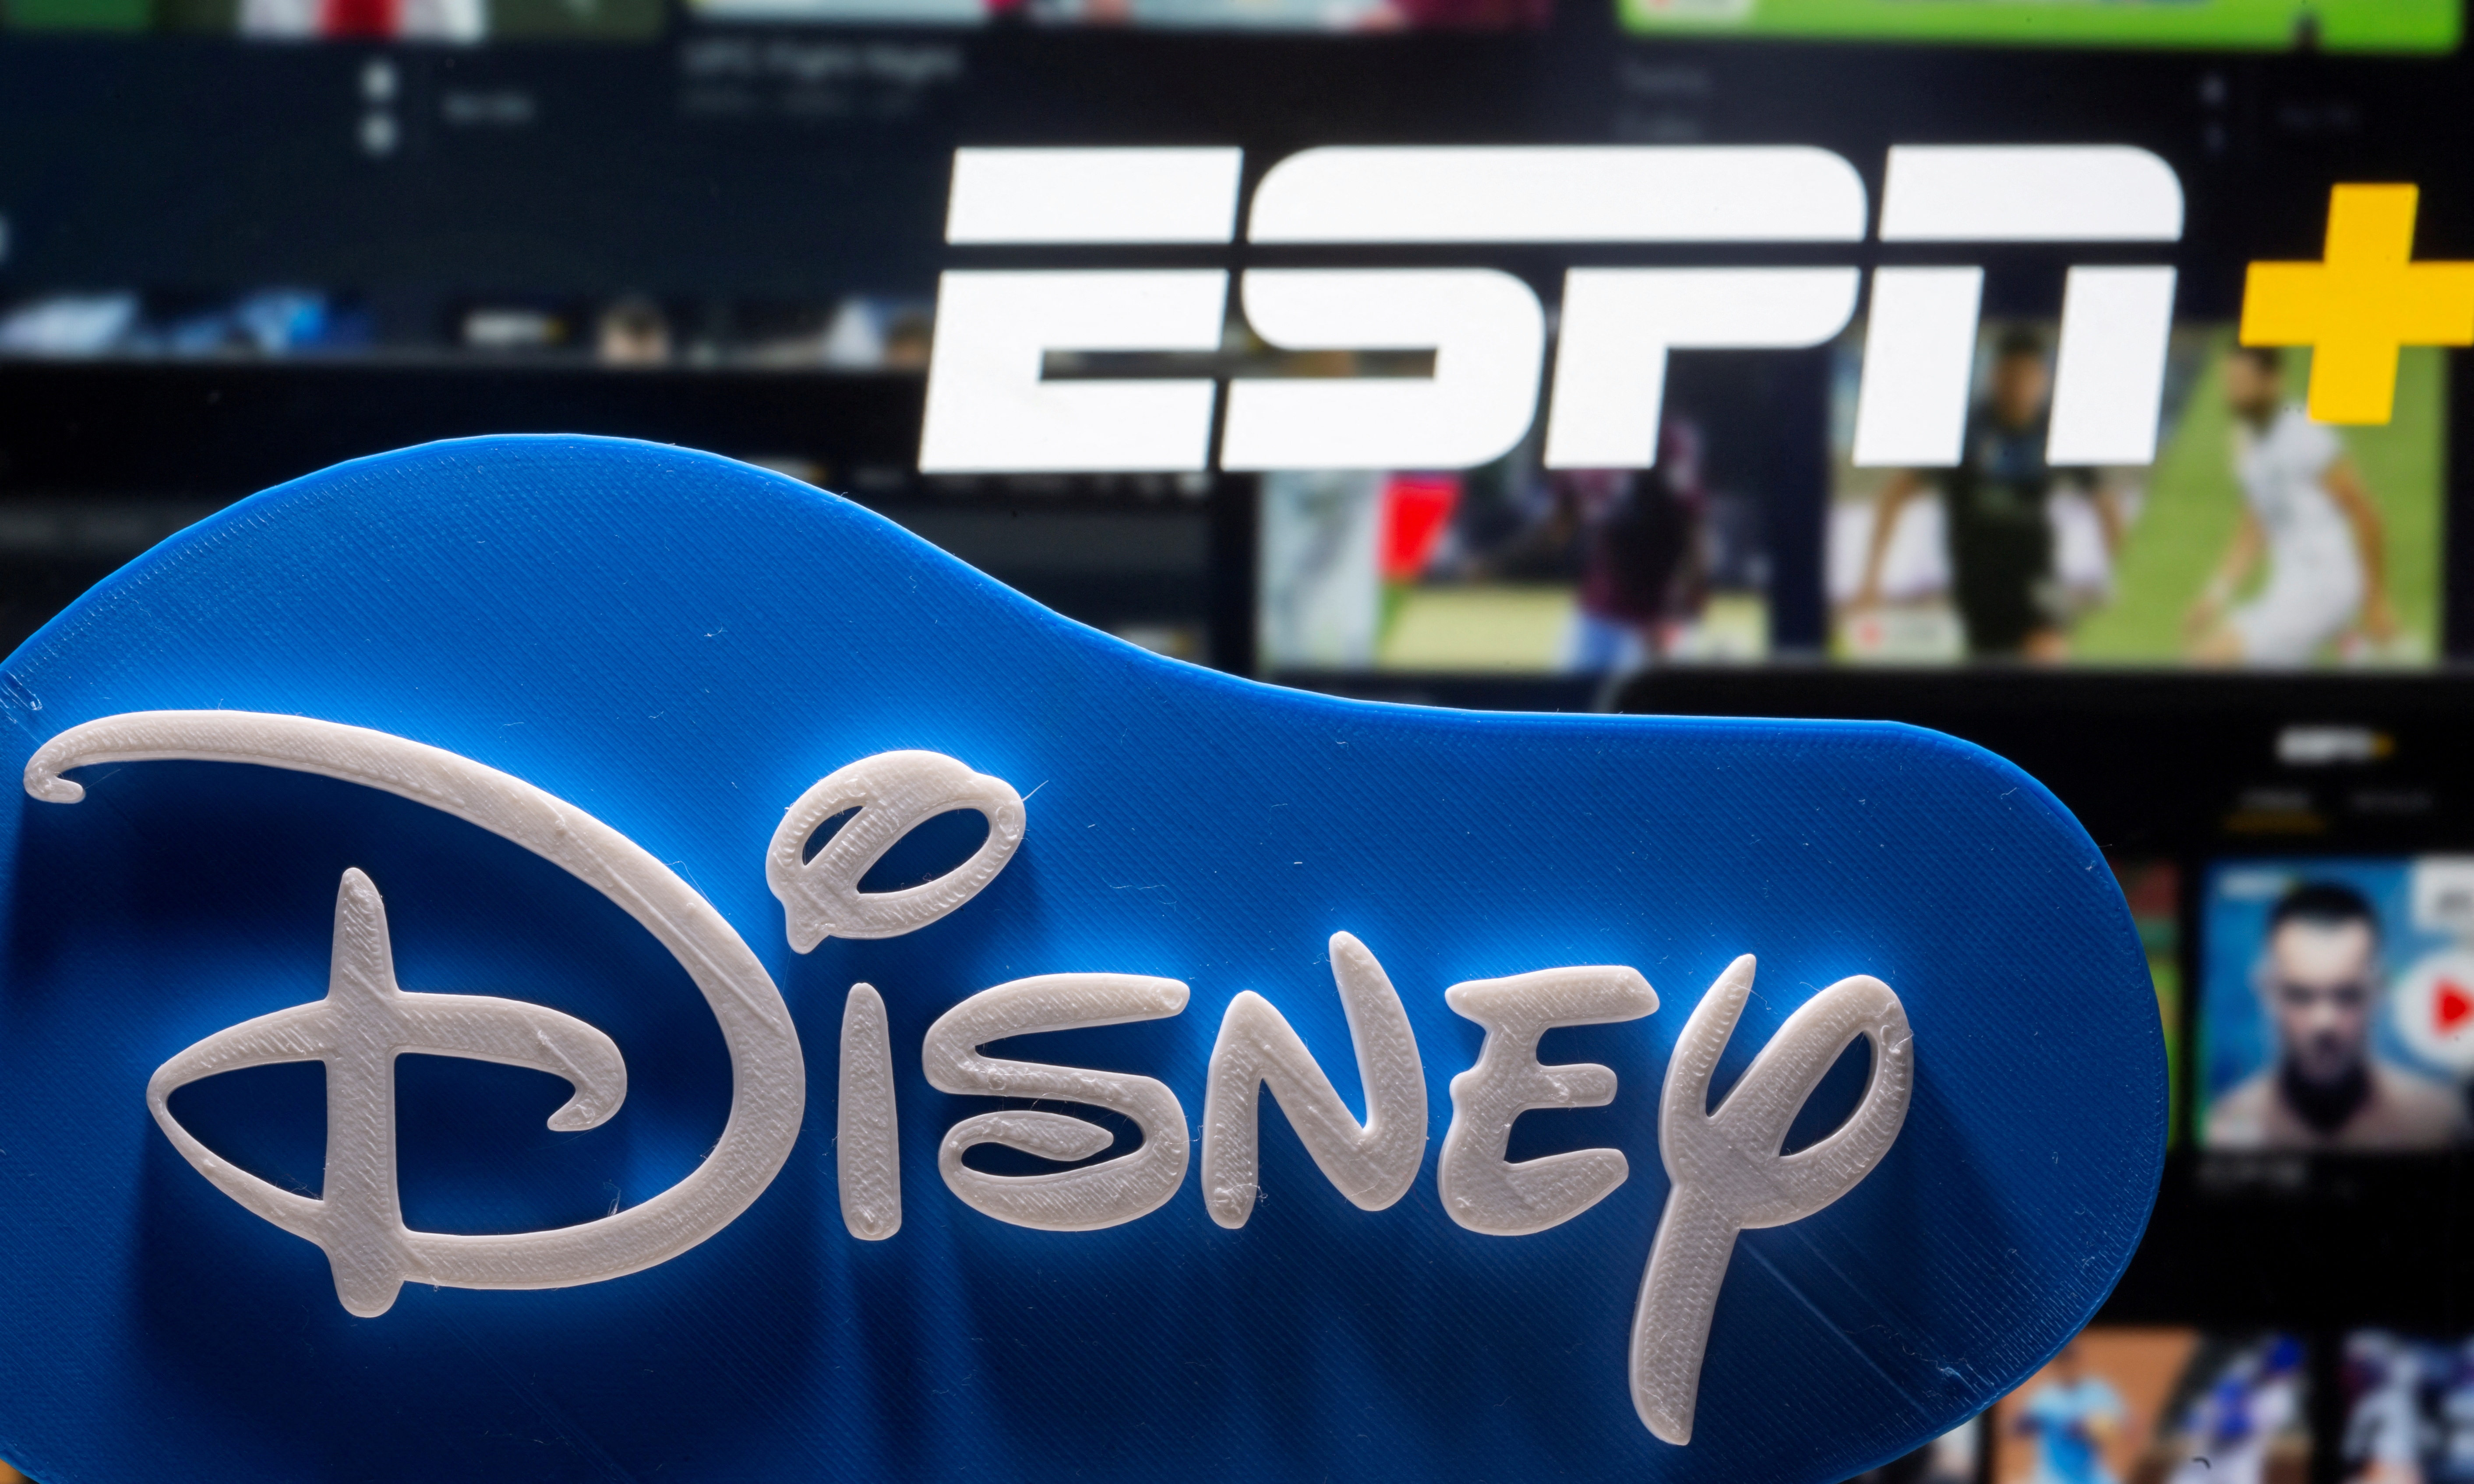 Photo illustration of a 3D-printed Disney logo seen in front of the ESPN+ logo